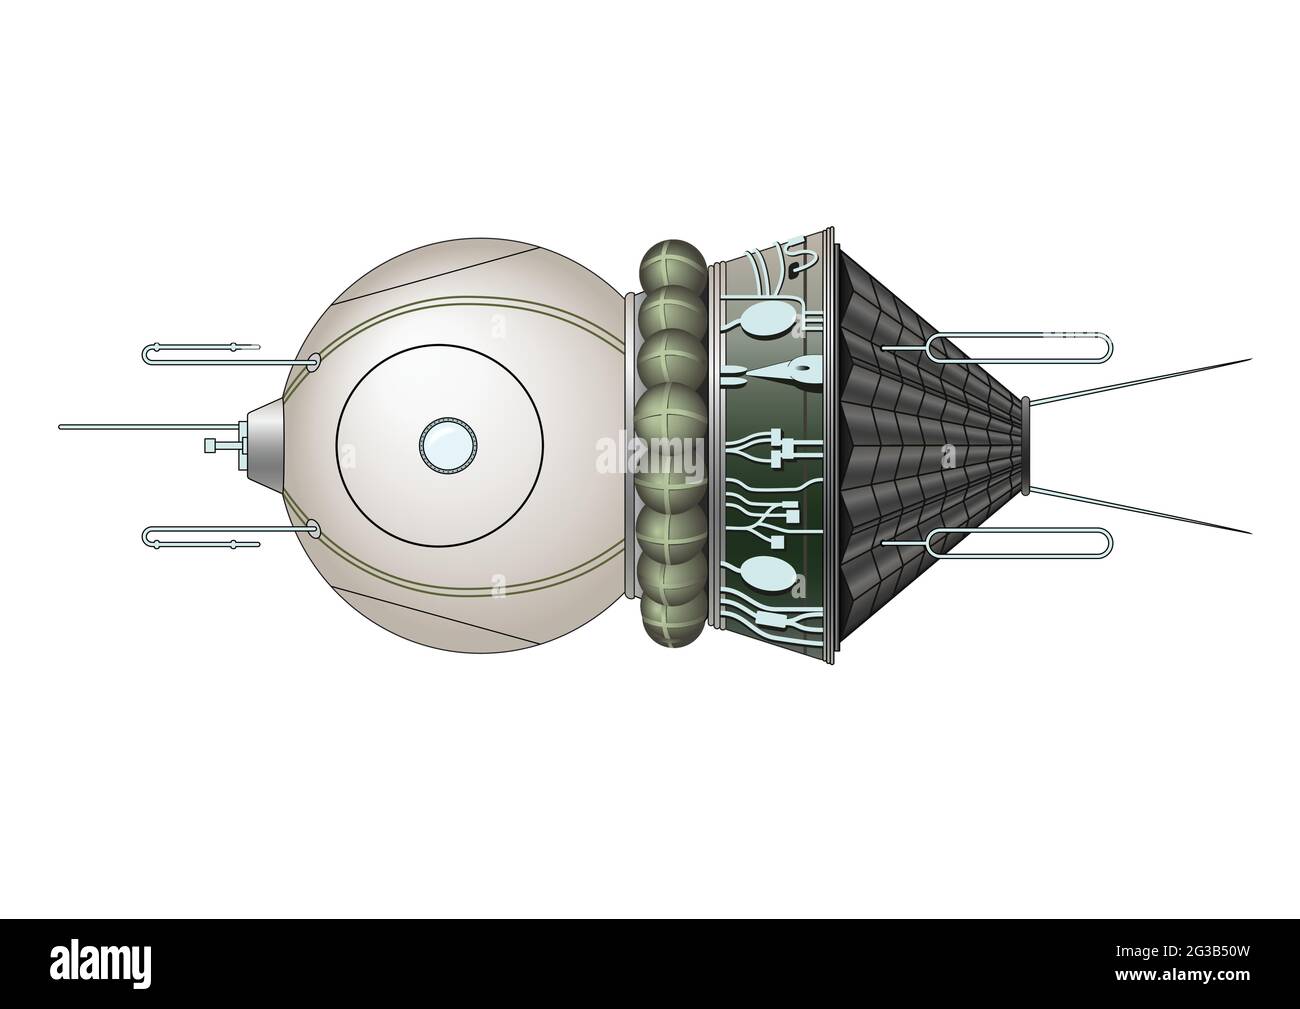 Capsules for the cosmonaut of the Vostok spacecraft. Vostok - the first rocket that transported man into space. Stock Vector